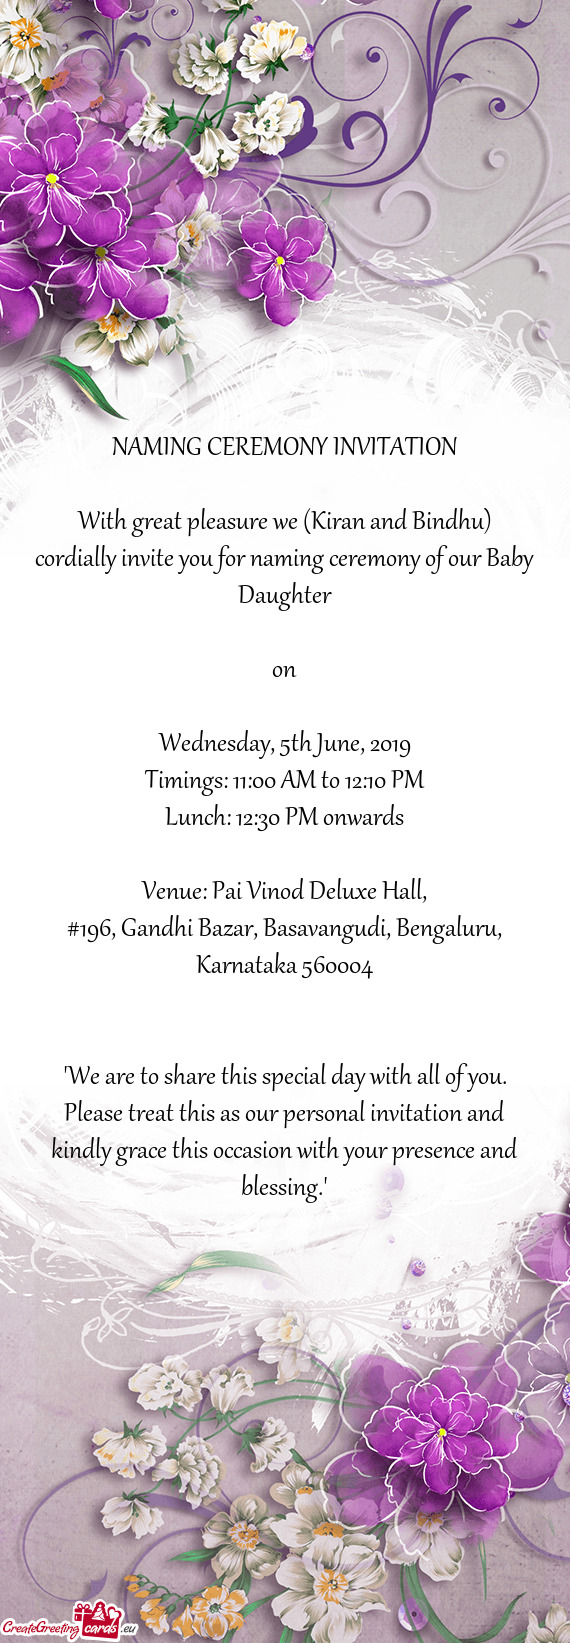 With great pleasure we (Kiran and Bindhu) cordially invite you for naming ceremony of our Baby Daugh